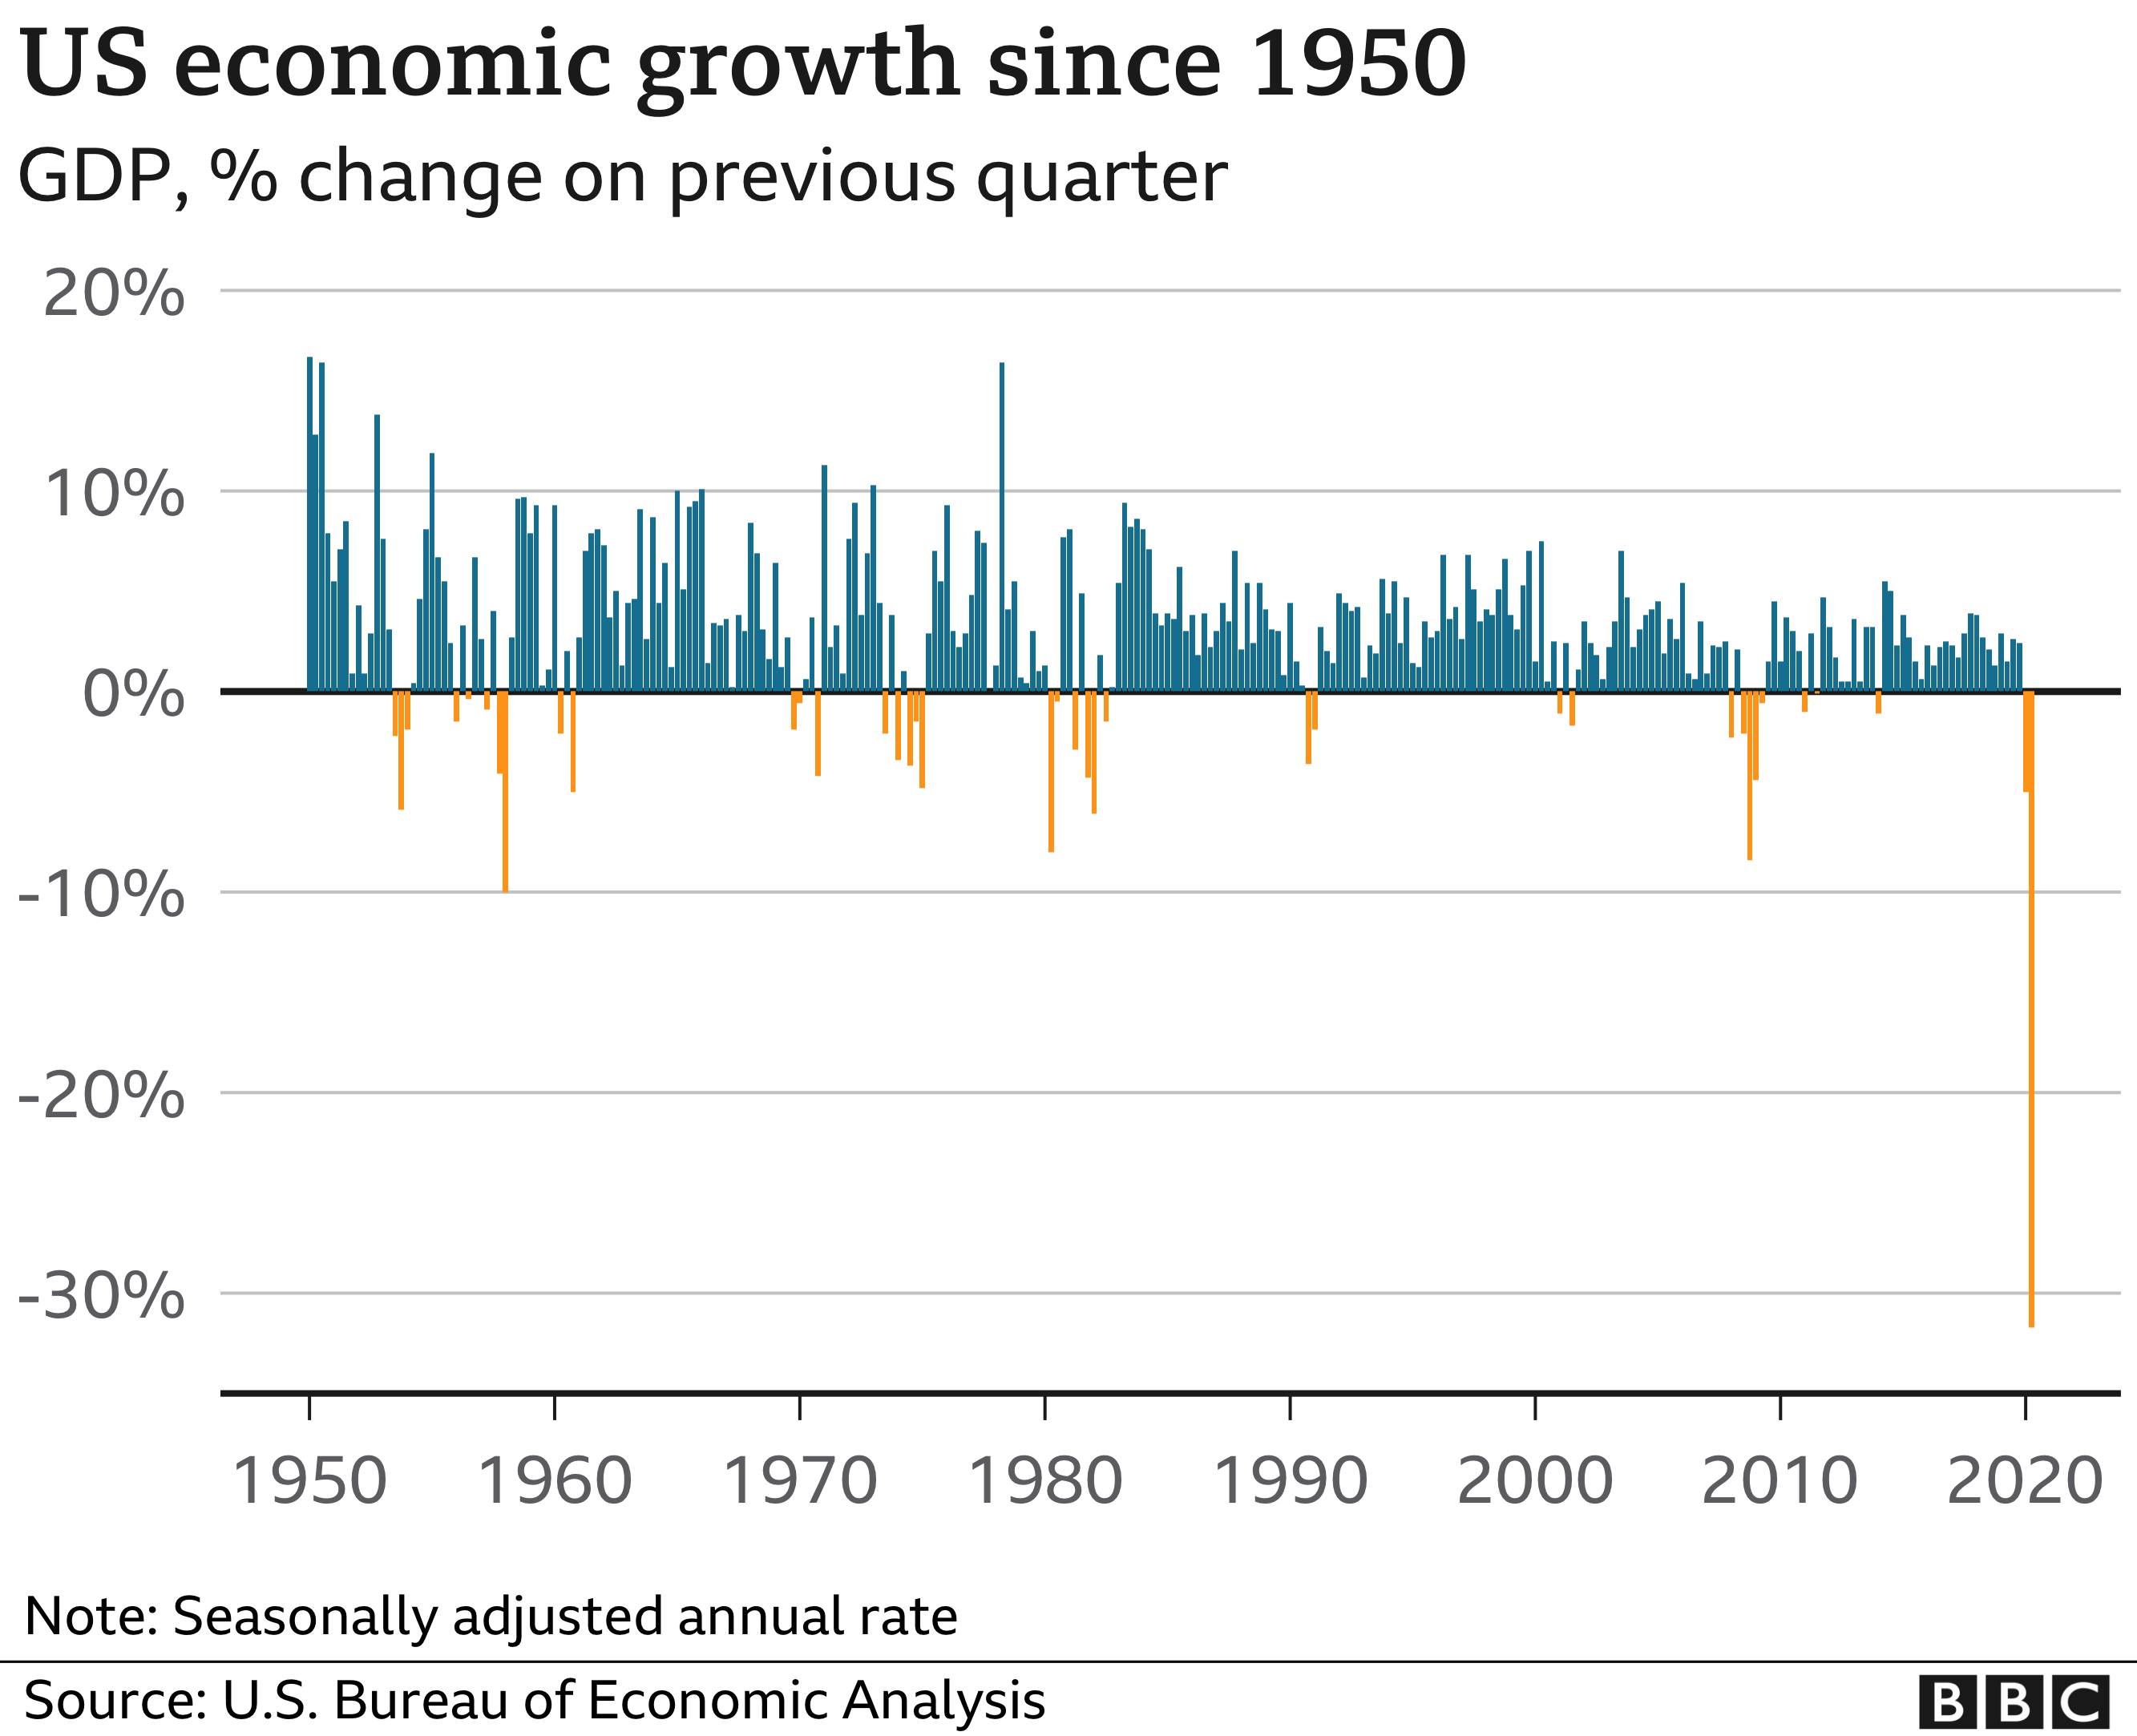 GDP growth since 1950s